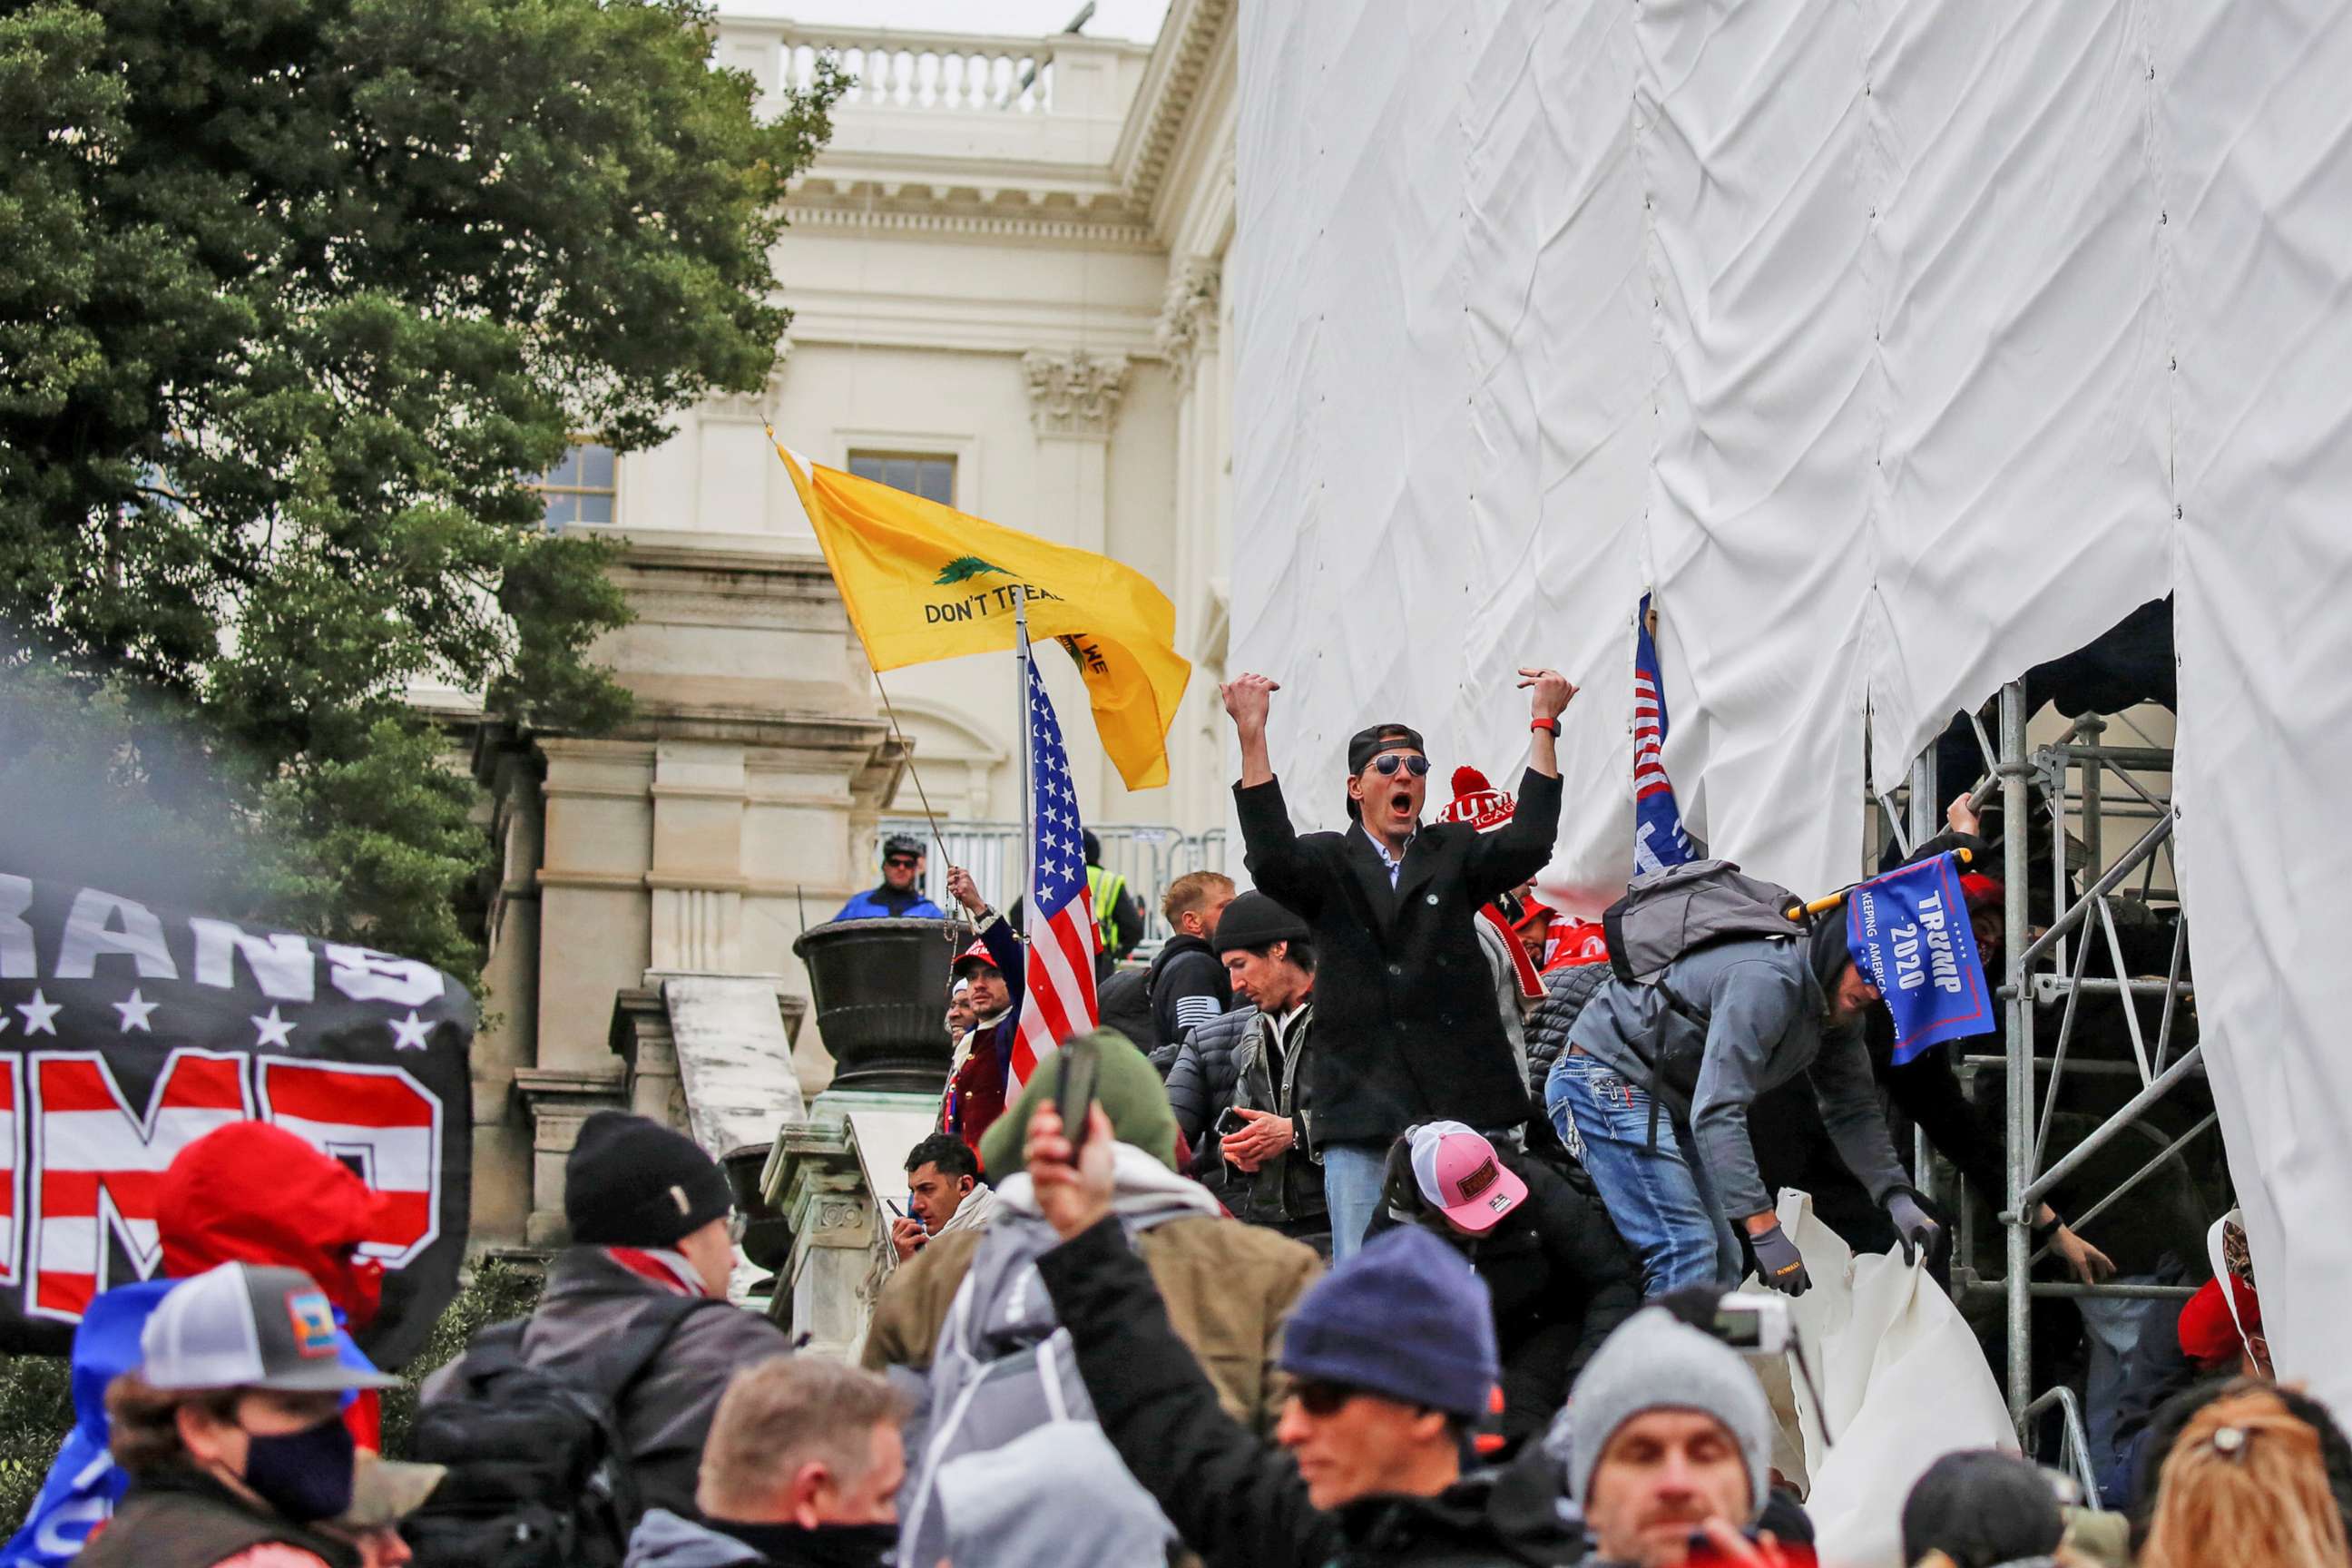 PHOTO: Supporters of President Donald Trump, including a person identified as Ryan Kelley, center, make their way past barriers at the U.S. Capitol during a protest against the certification of the 2020 presidential election results, in Washington, D.C.